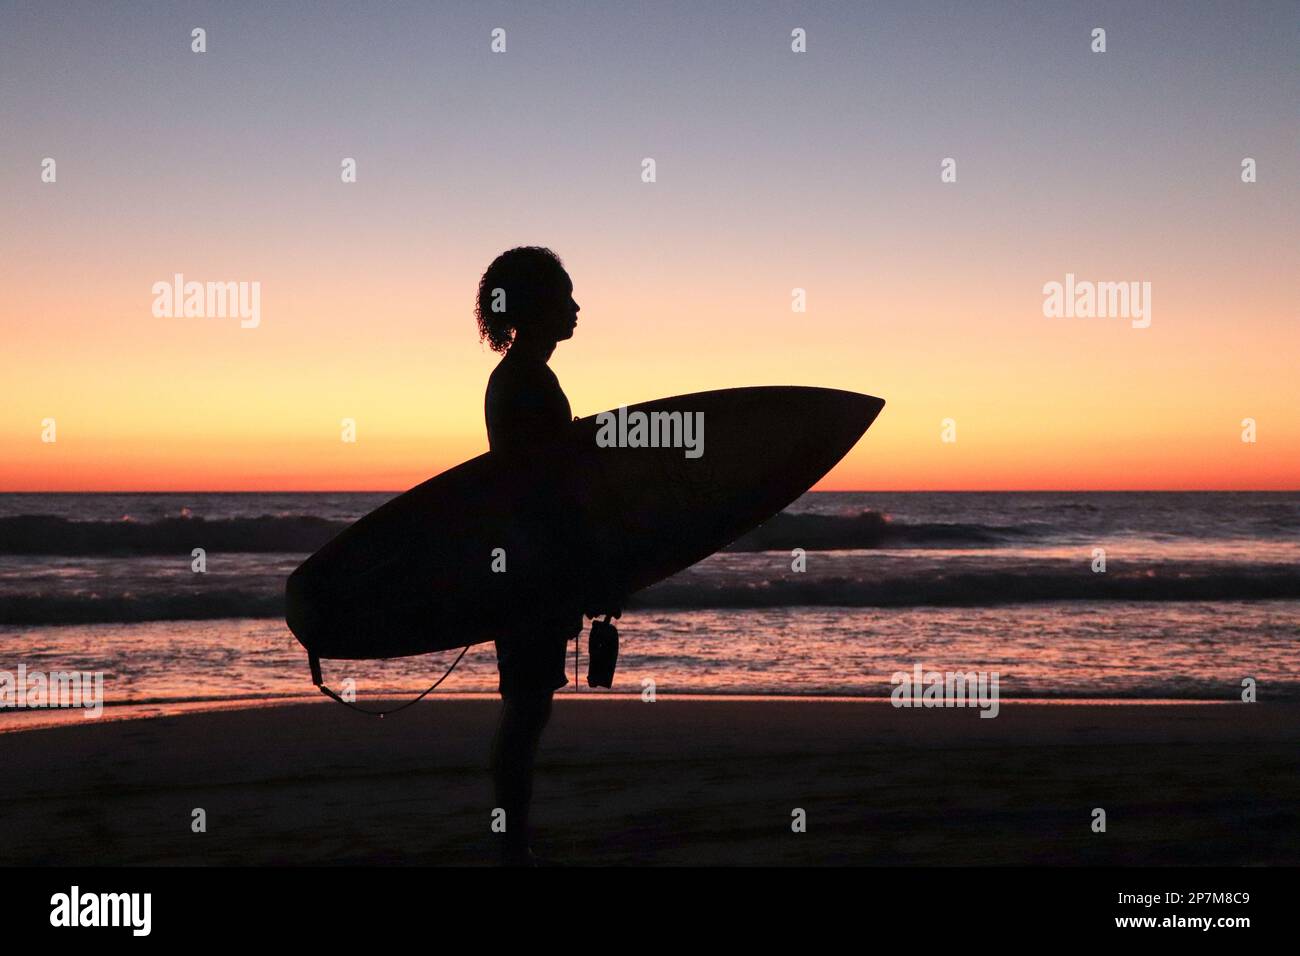 Silhouette of Oniel Lopez, young male surfer holding his surfboard at sunset on Jiquilillo beach, Nicaragua Stock Photo